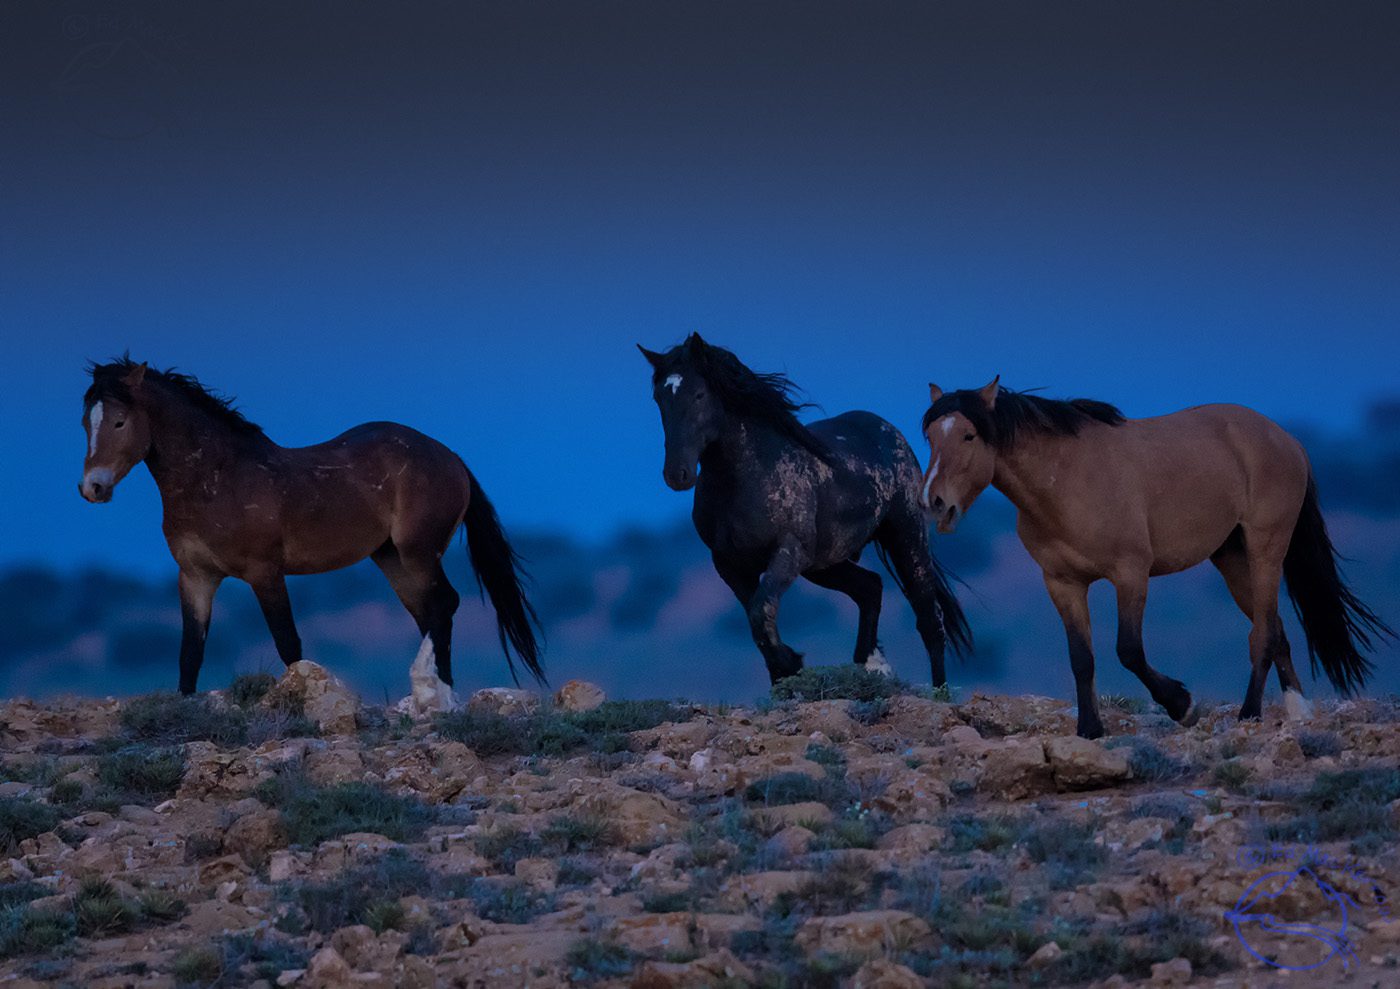 Wild Mustangs come thundering over a rise as night falls.